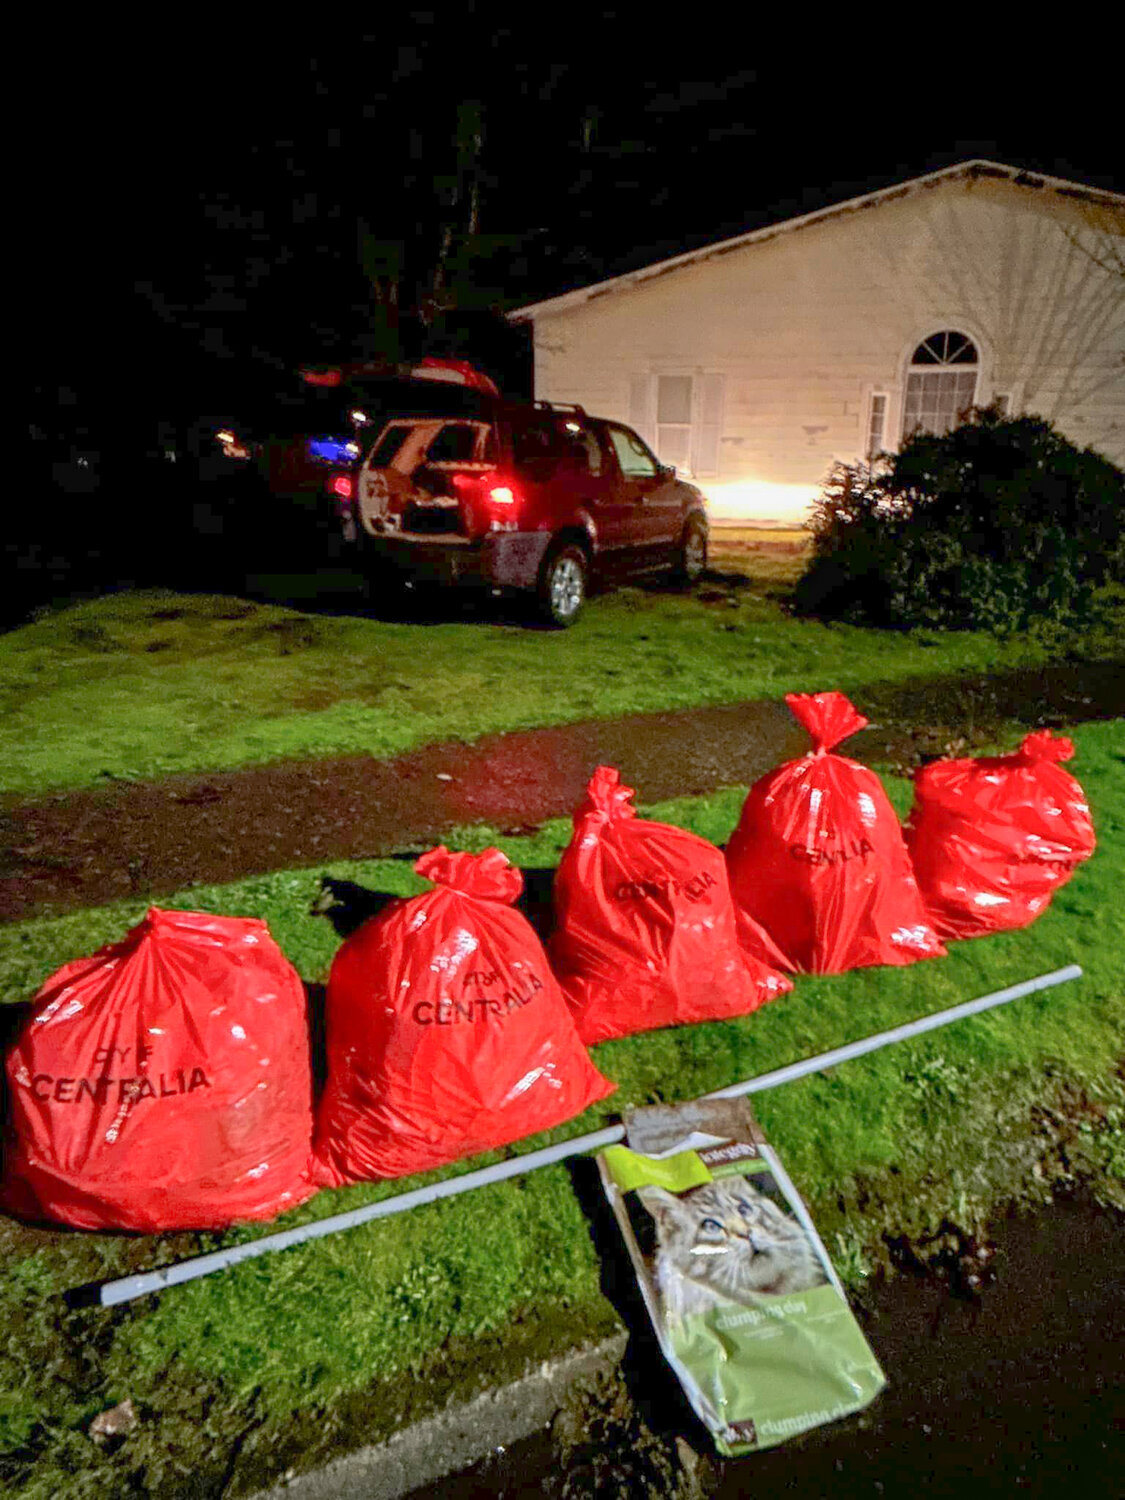 Multiple bags of trash collected by Centralia Clean Team volunteer Cindy Browne are seen left near the street along with discarded tubing and a cat food bag Browne collected while picking up trash in the Logan District on Dec. 5. Once filled, bags are left to be picked up by the Centralia Public Works Department.